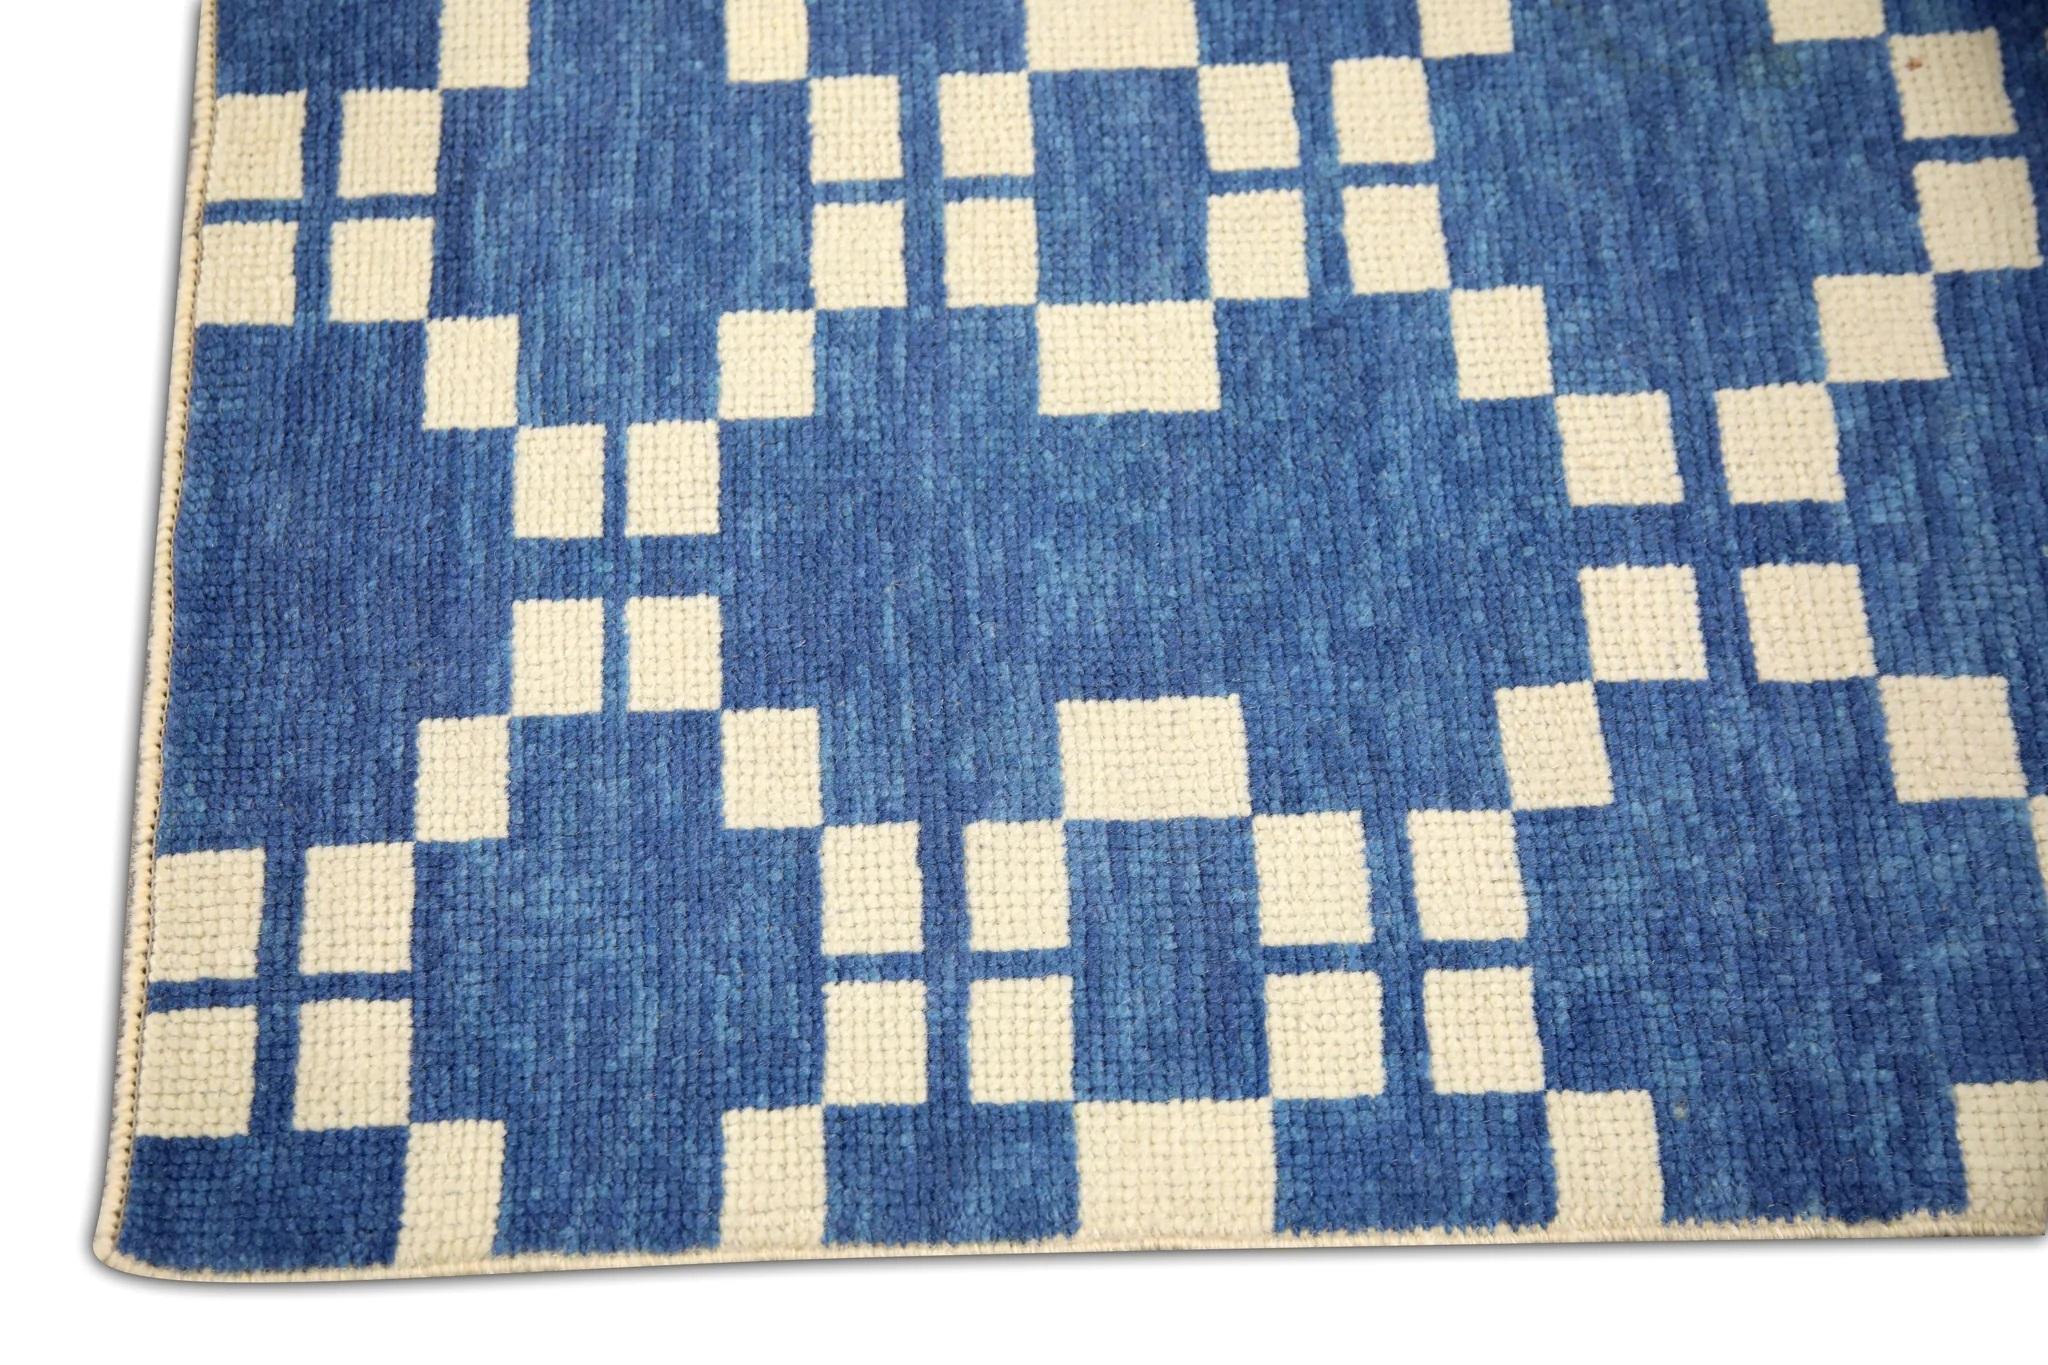 Vegetable Dyed Tribal Geometric Handwoven Turkish Oushak Rug in Blue and Cream 3' x 5'2